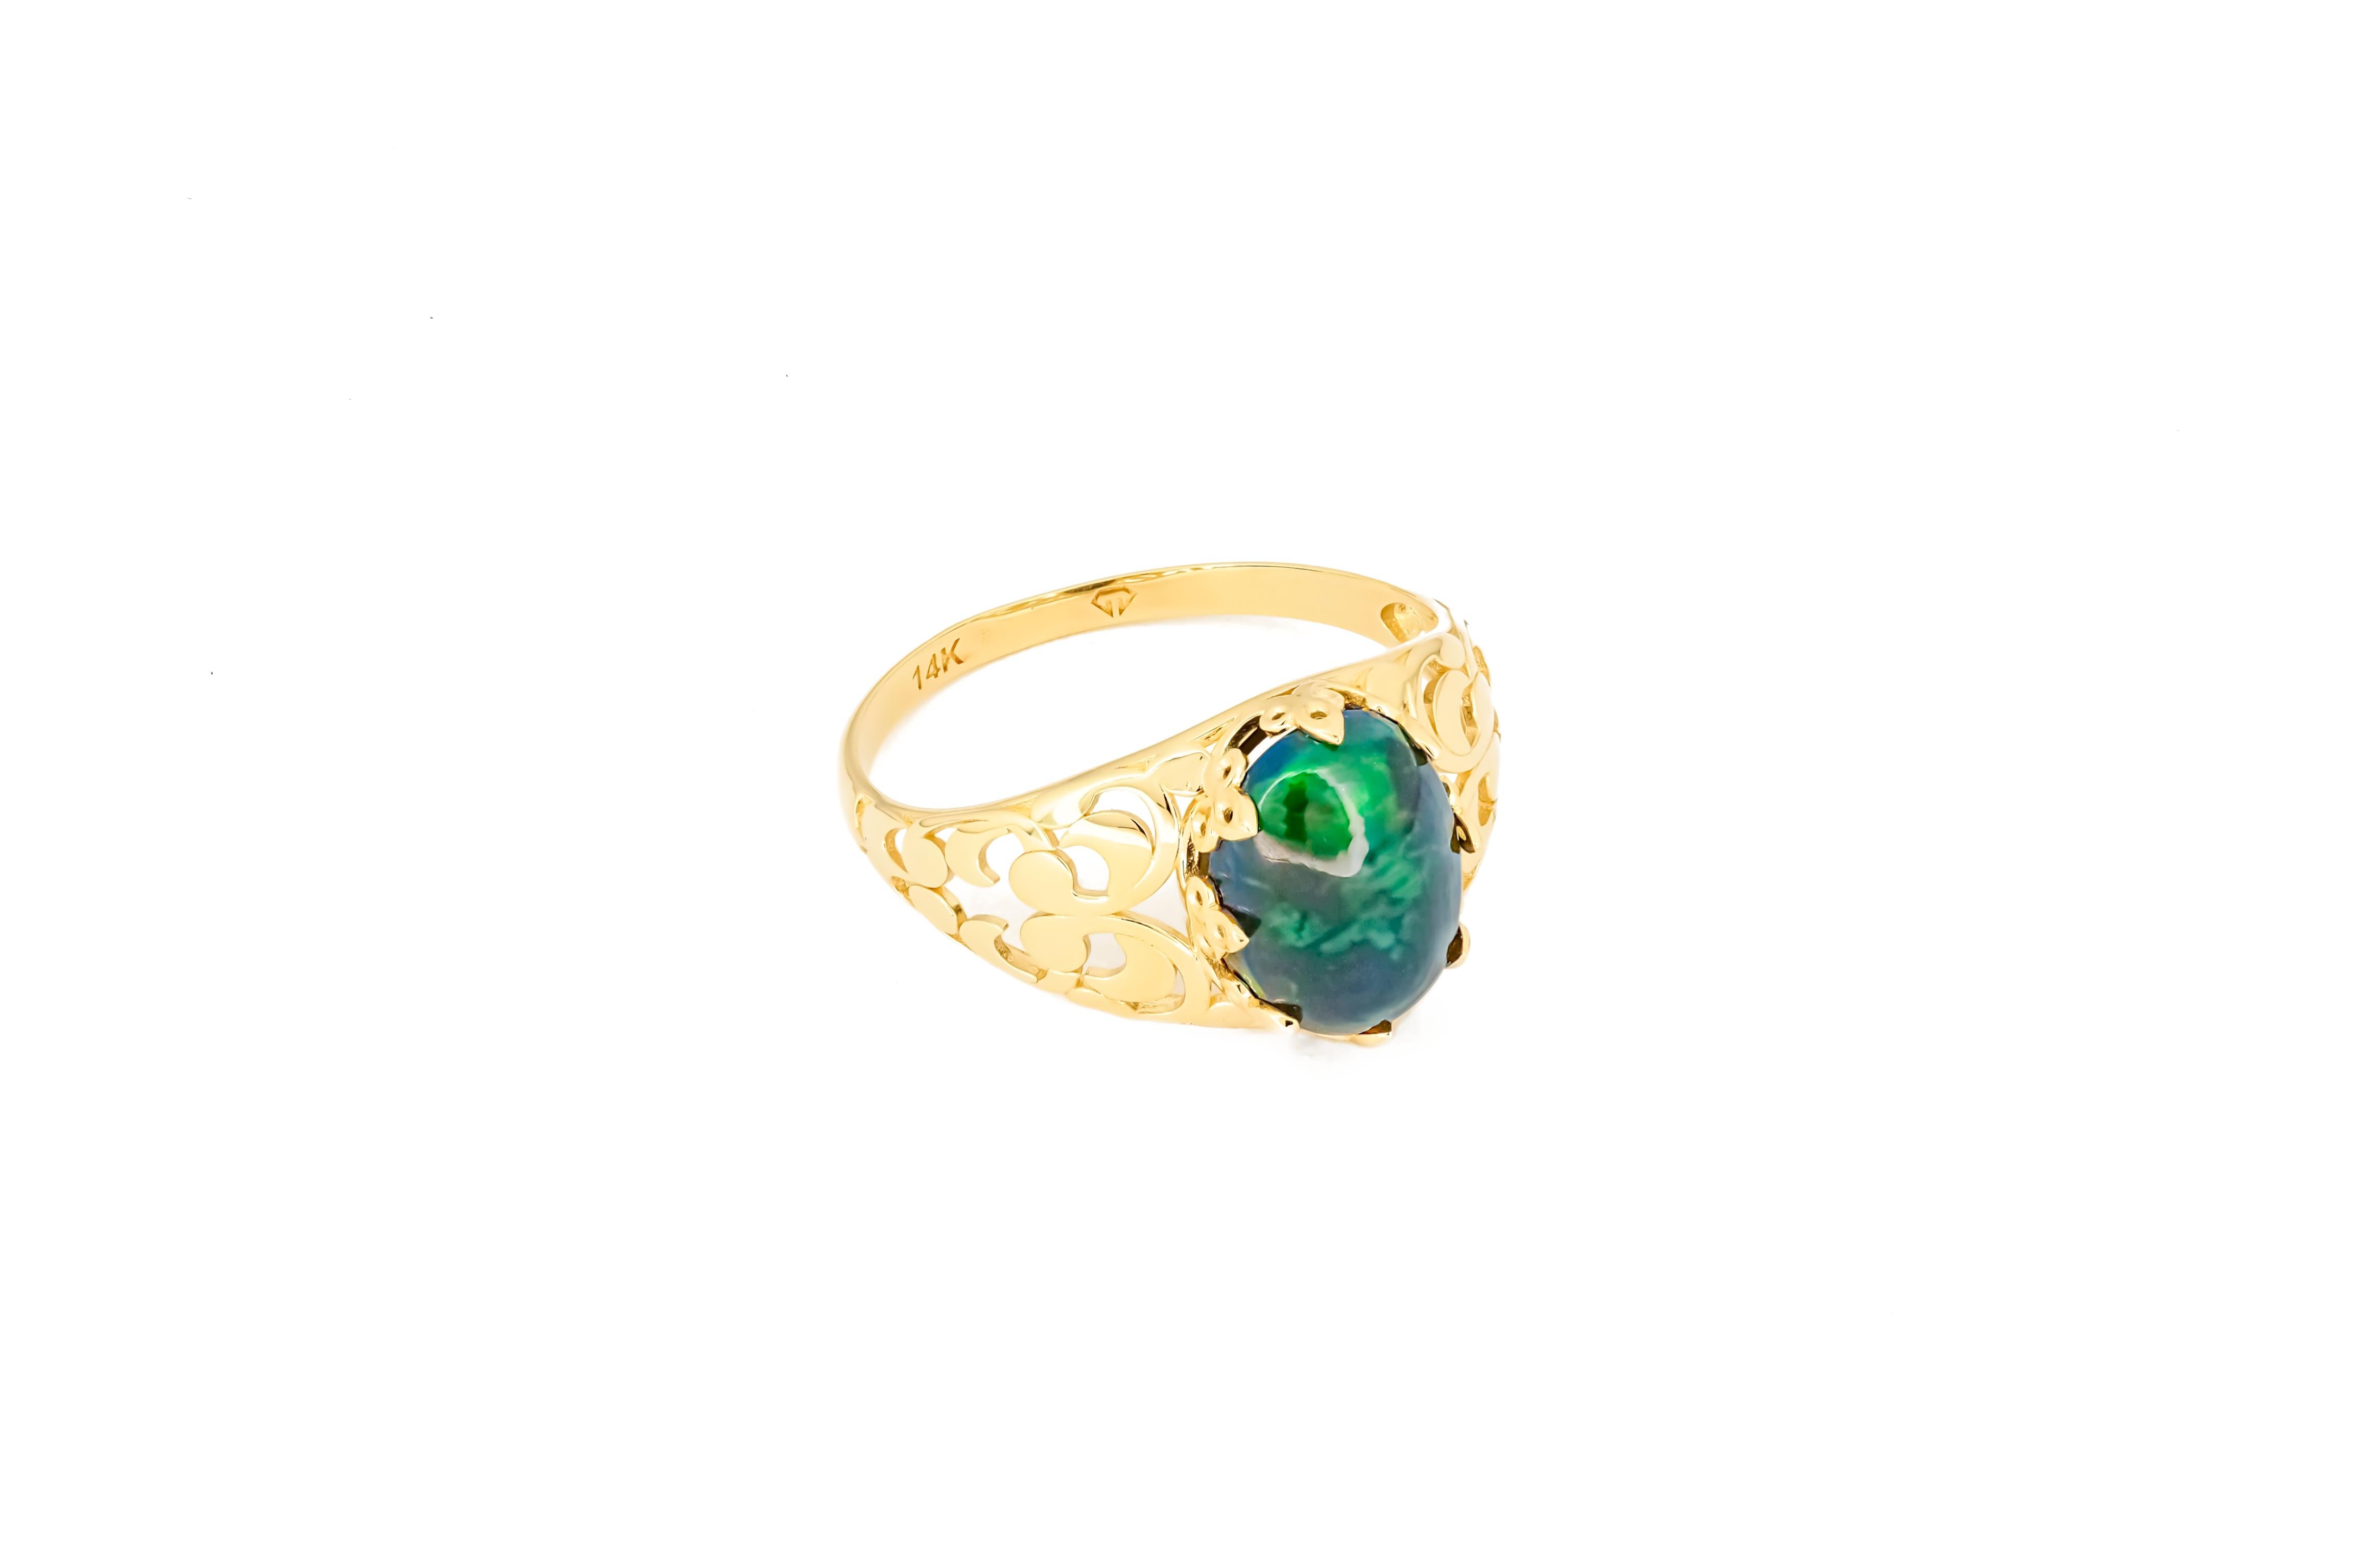 For Sale:  Black Opal Vitage Style Ring in 14 Karat Gold, Ethiopian Opal Cabochon Ring 5